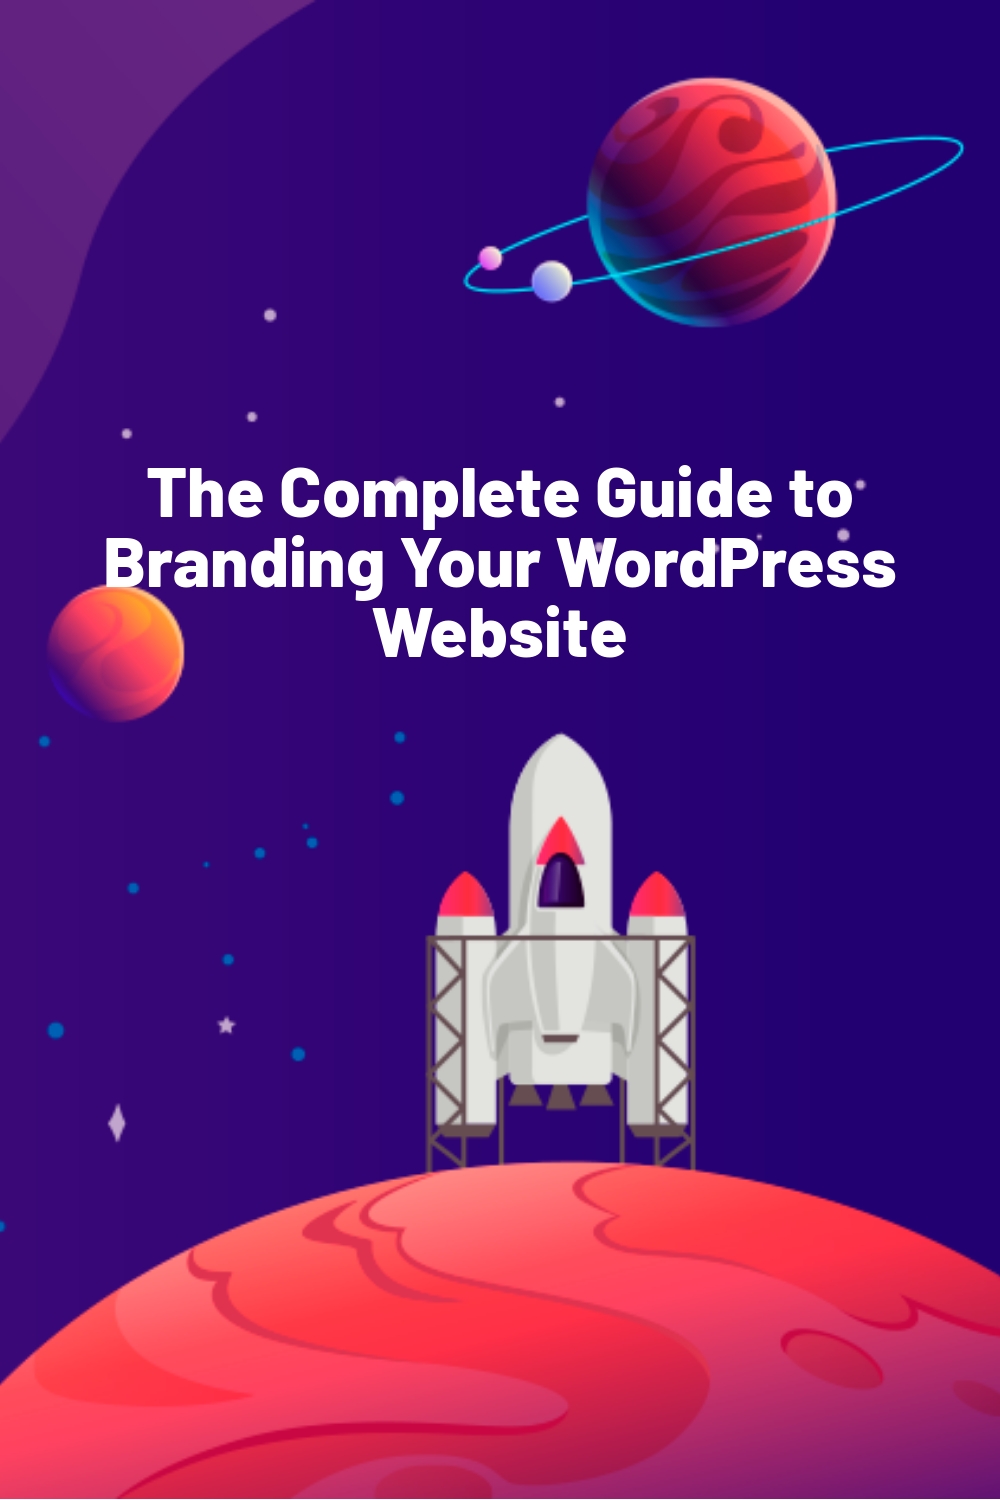 The Complete Guide to Branding Your WordPress Website